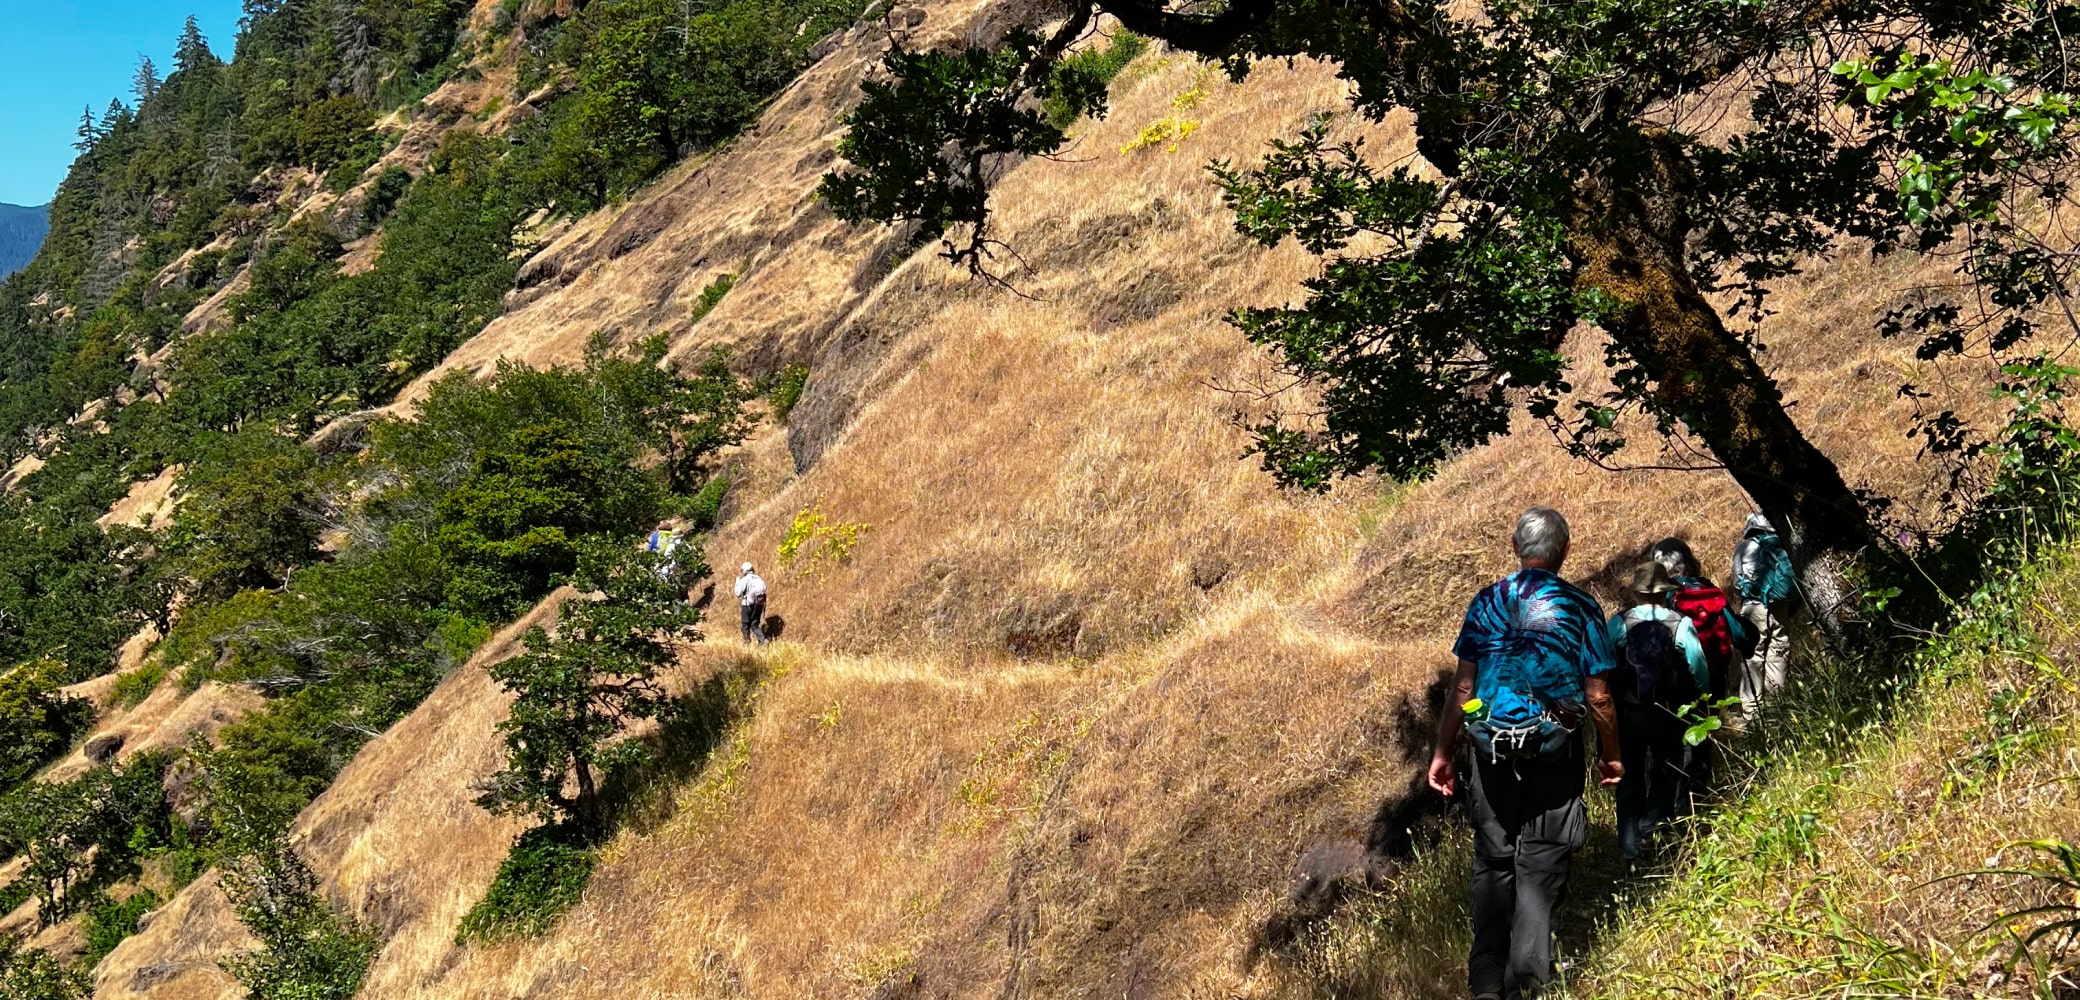 Groups of hikers walking along a grassy and forested mountainside above the Rogue River.